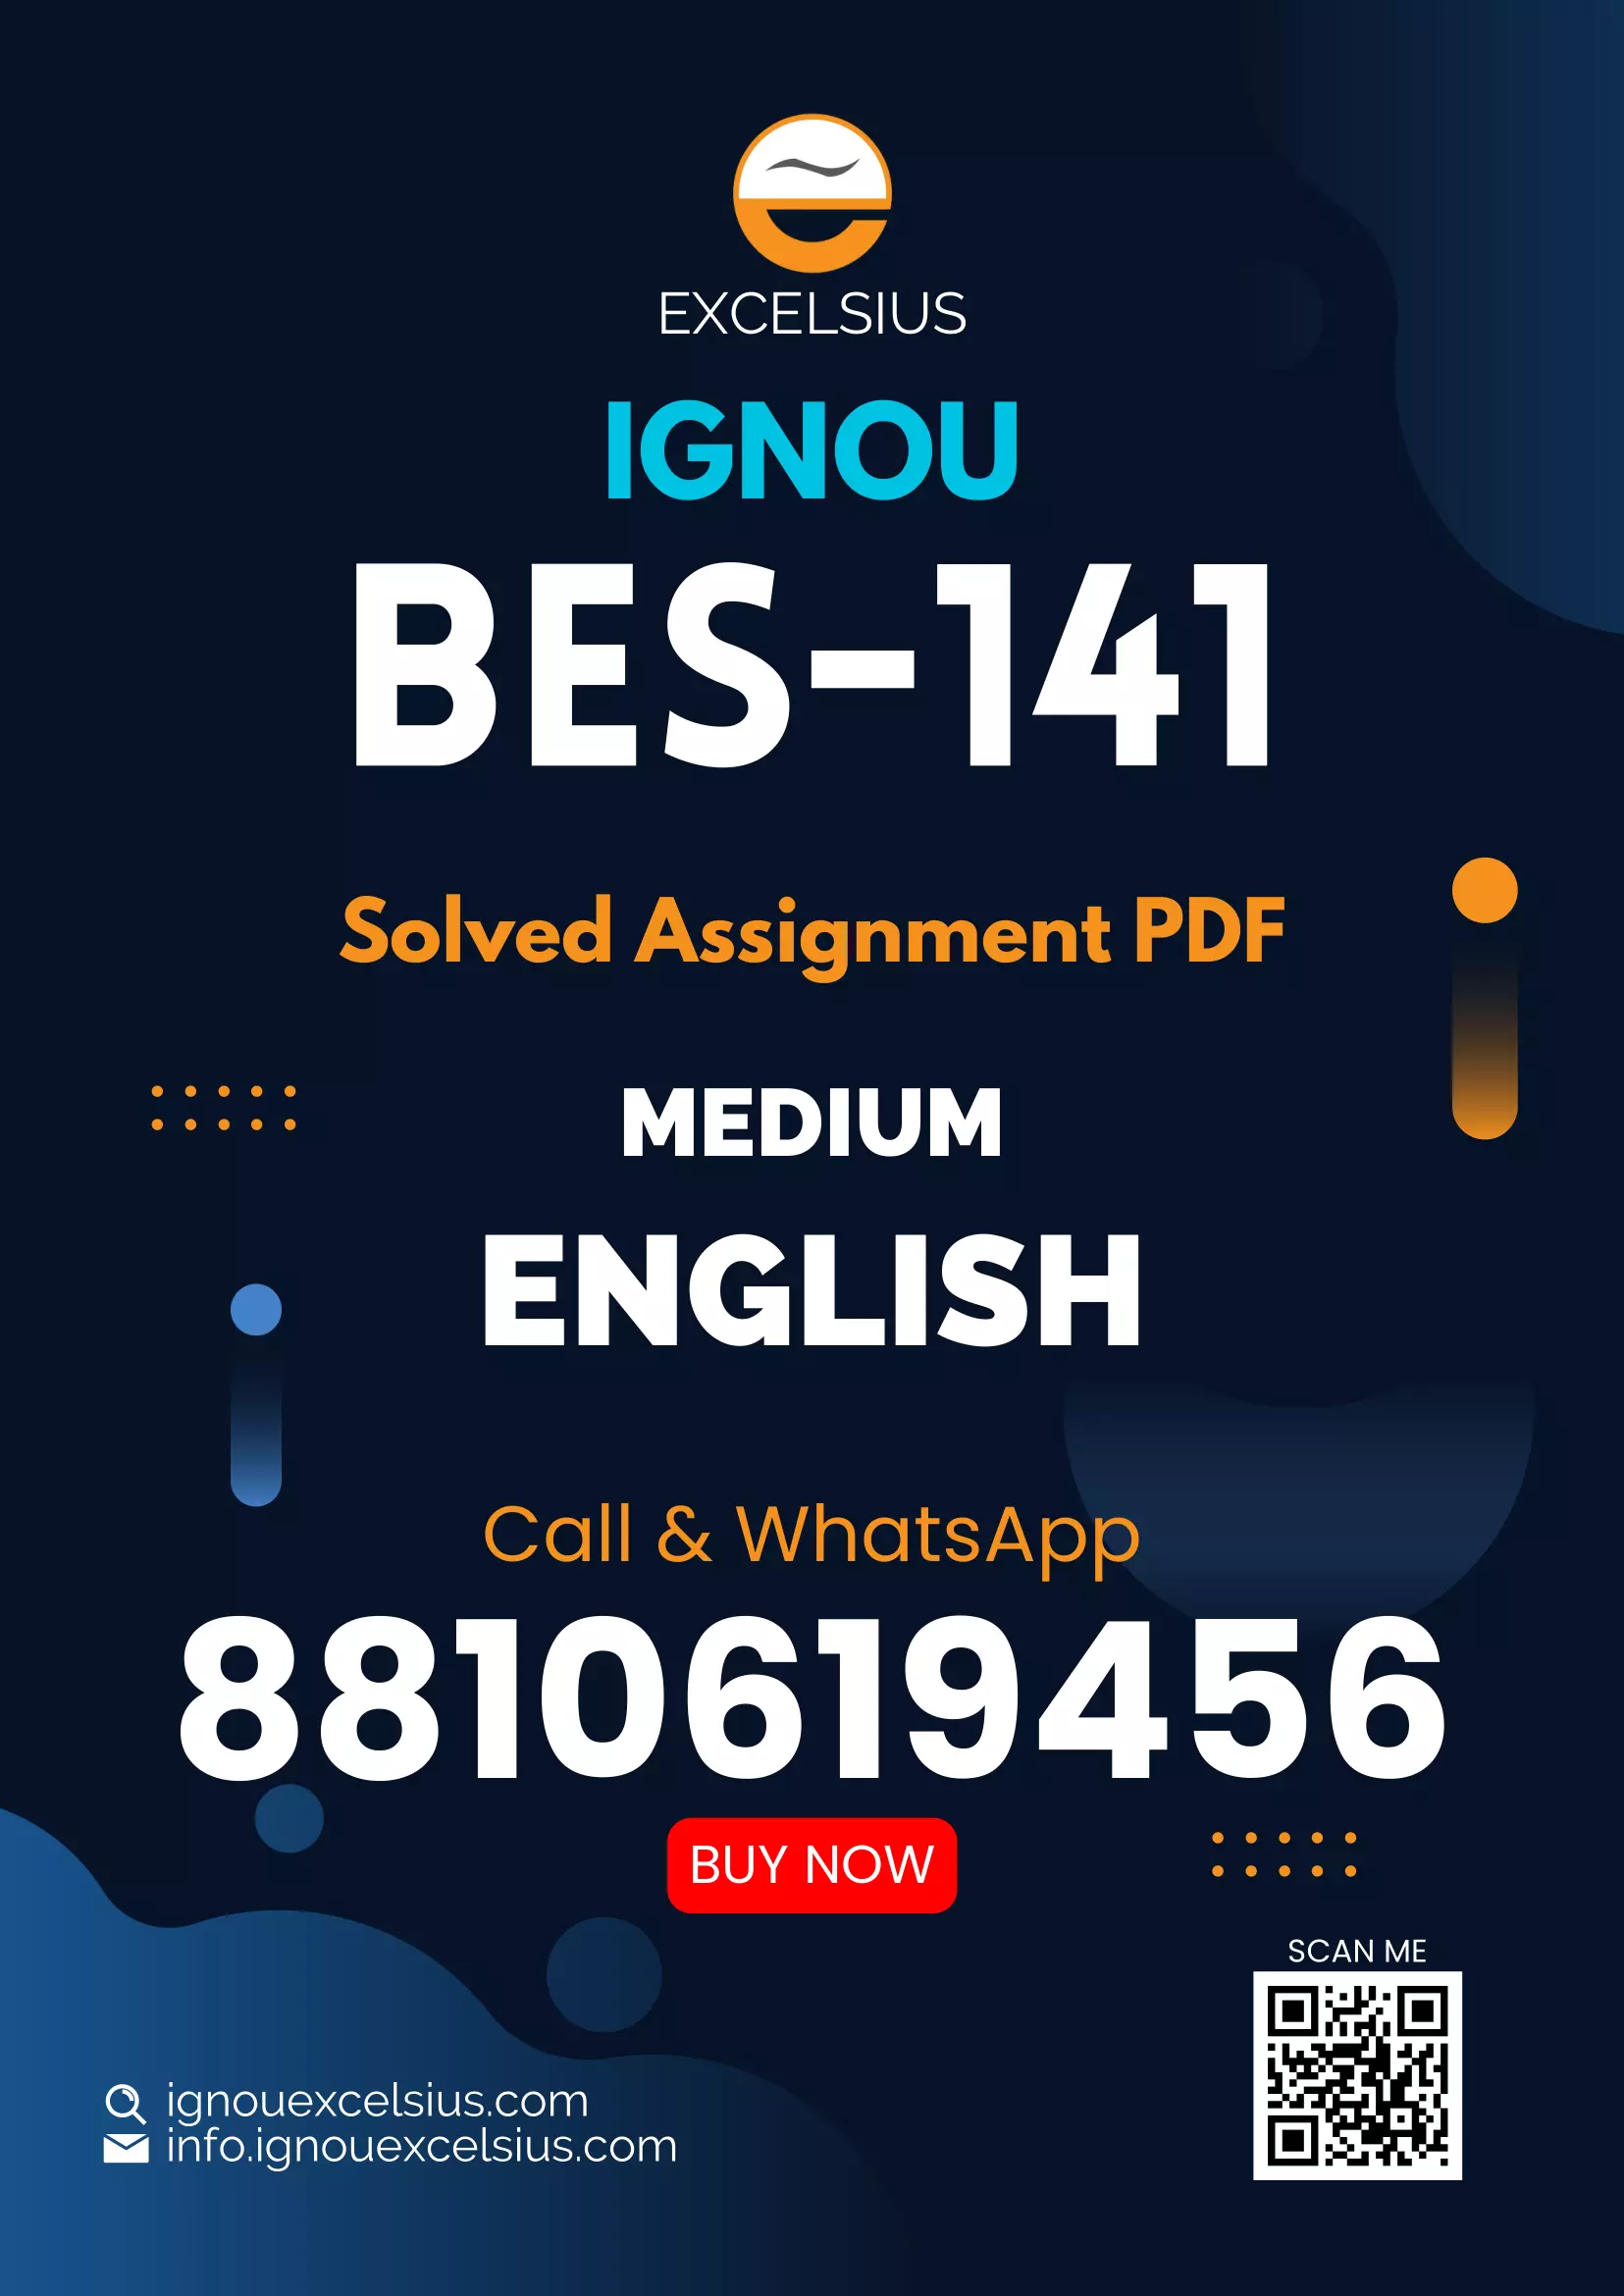 IGNOU BES-141 - Pedagogy of Science, Latest Solved Assignment-January 2022